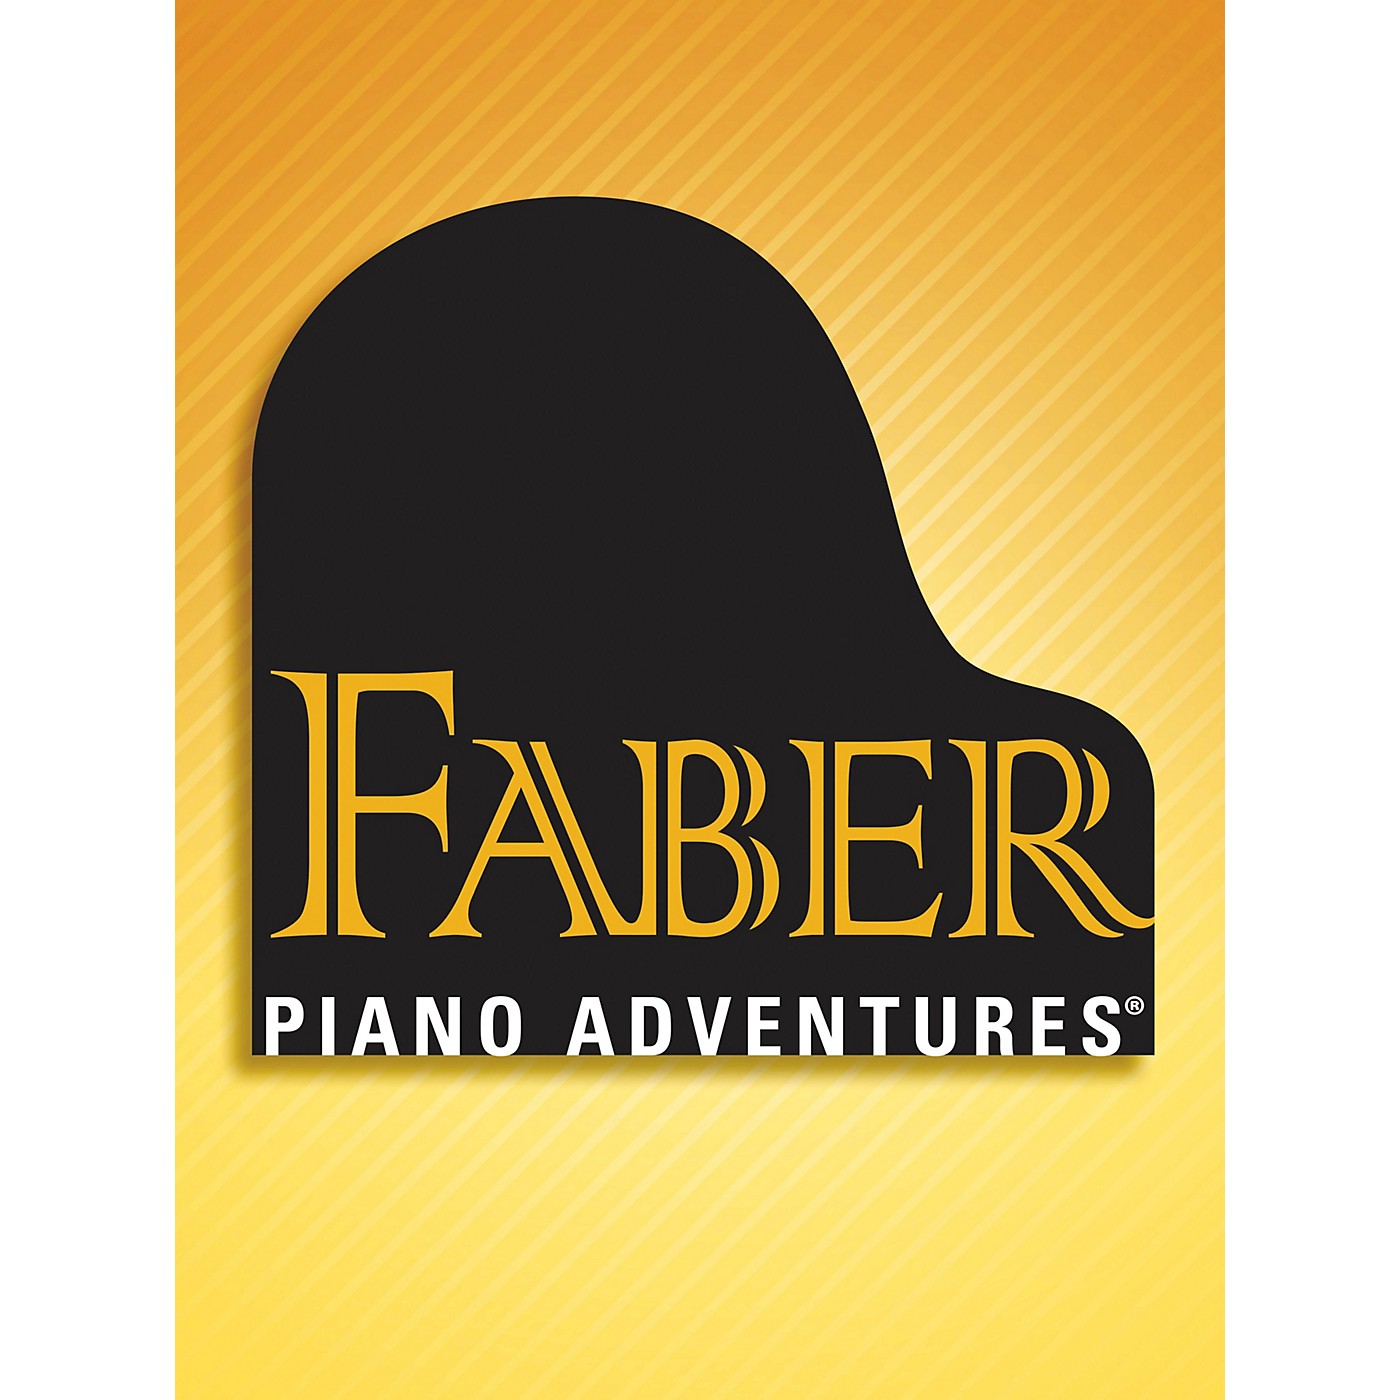 Faber Piano Adventures Level 2B - Popular Repertoire CD (Piano Adventures) Faber Piano Adventures Series CD by Nancy Faber thumbnail